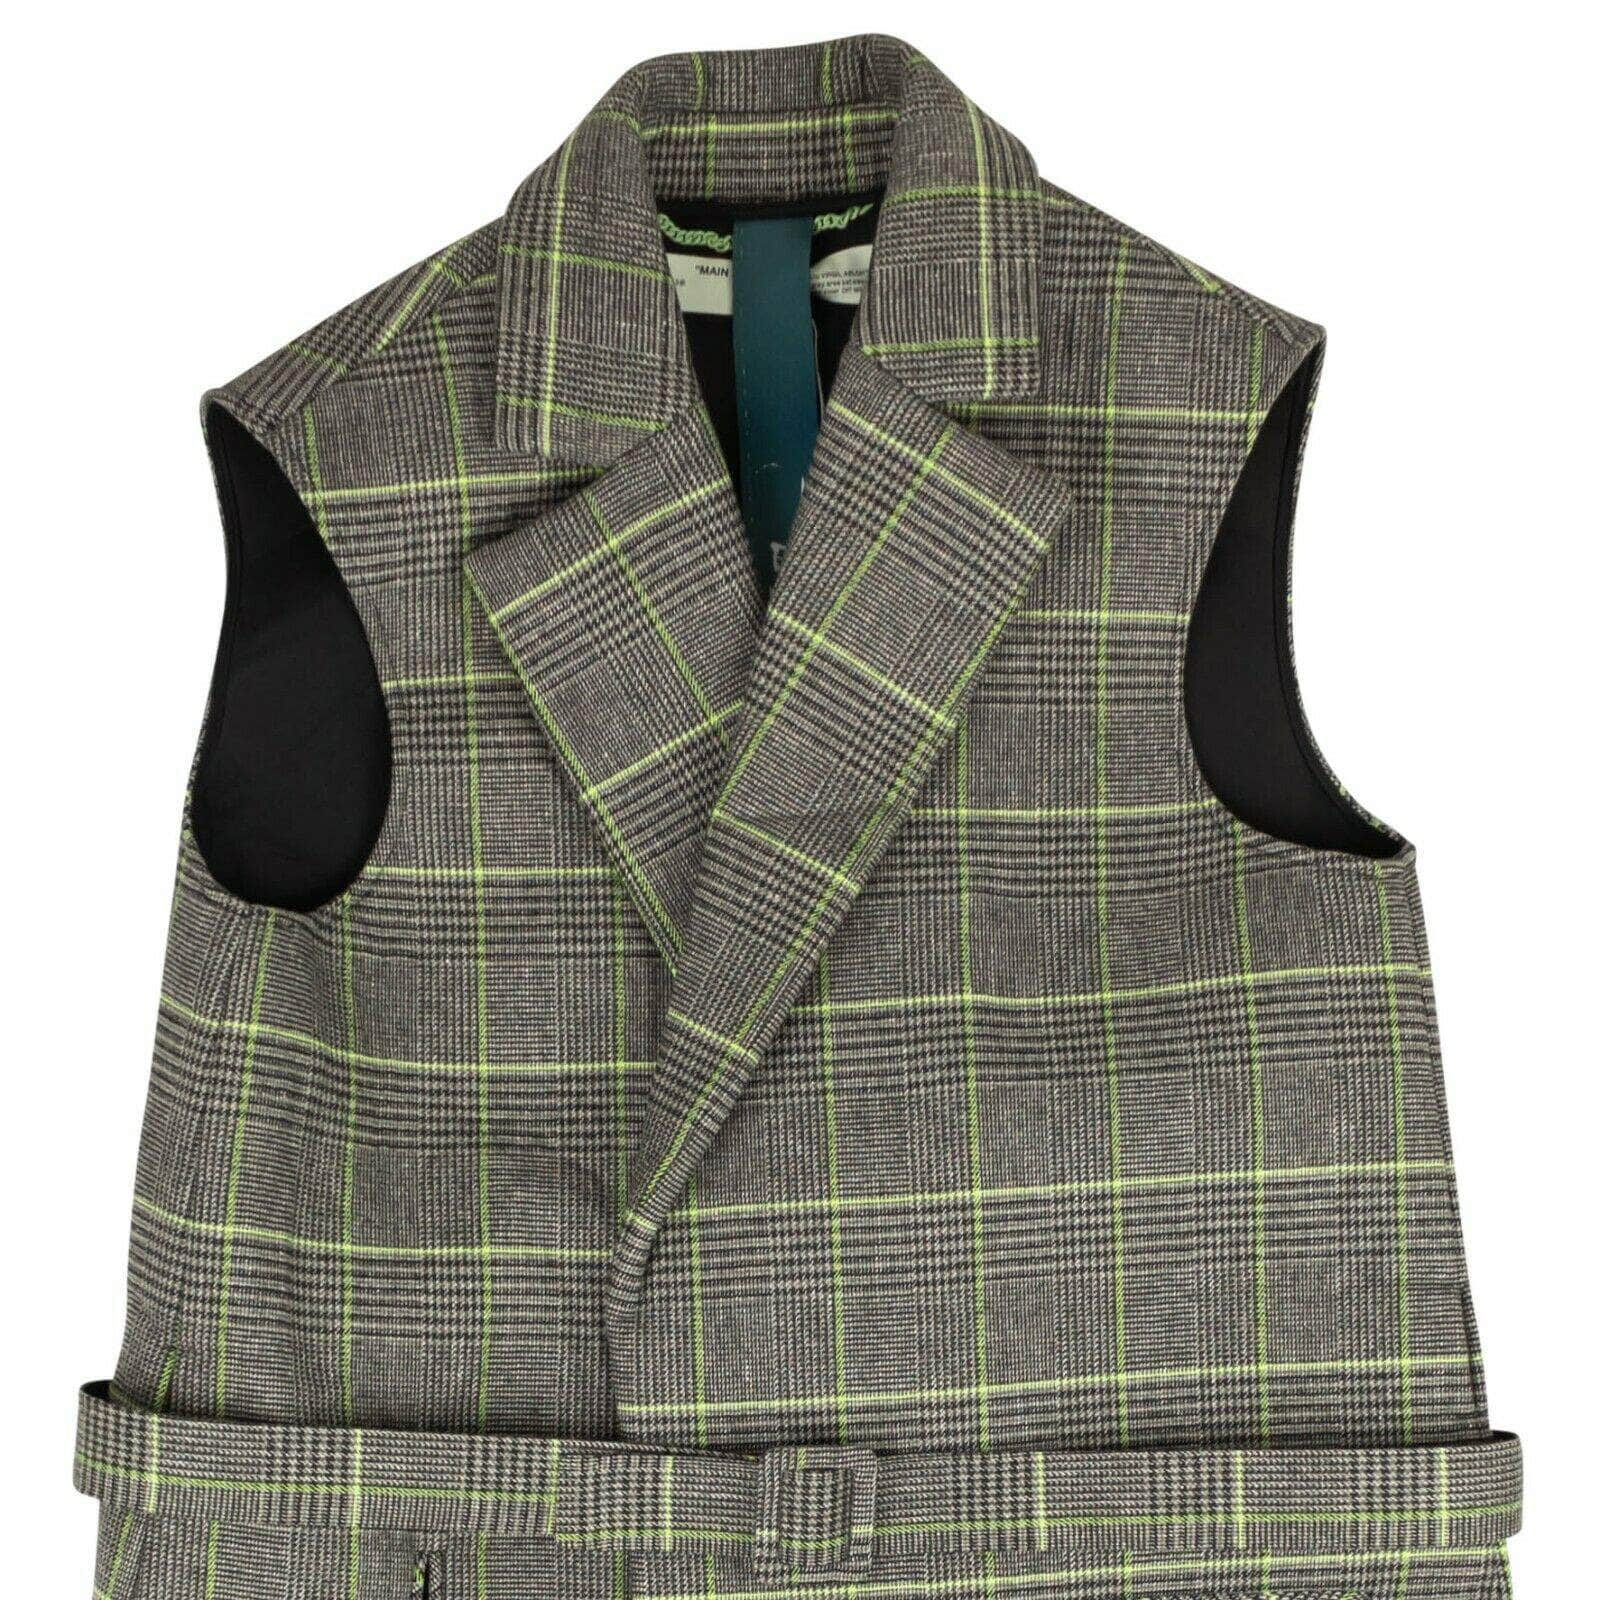 OFF-WHITE c/o VIRGIL ABLOH 1000-2000, channelenable-all, chicmi, couponcollection, gender-womens, main-clothing, off-white-c-o-virgil-abloh, OWW, size-42, womens-outerwear-vests 42 Gray Green Plaid Belt Vest Coat 95-OFW-0107/42 95-OFW-0107/42